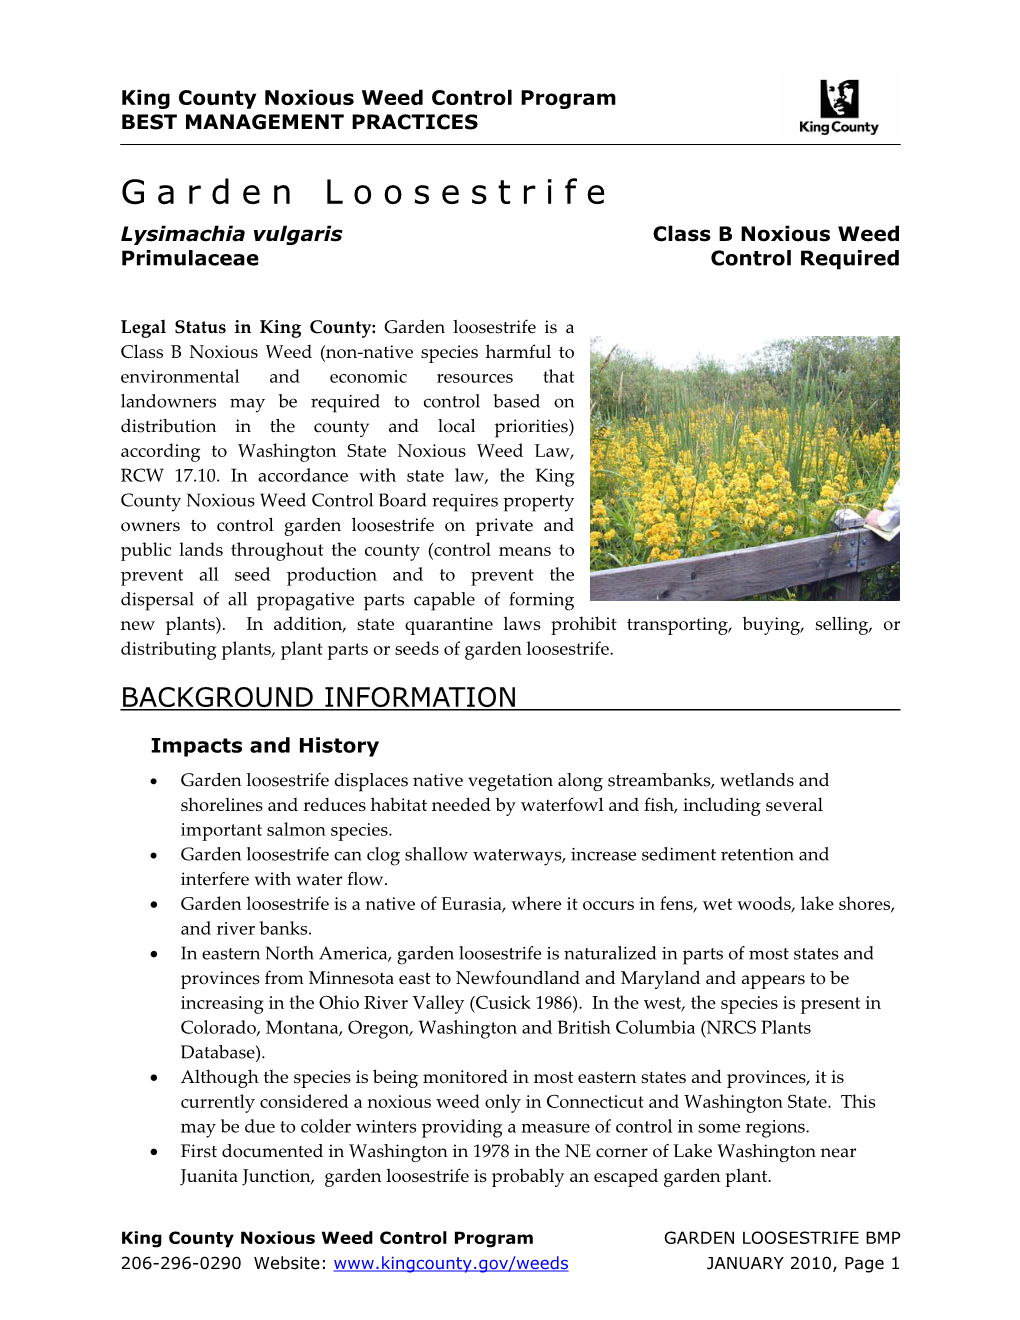 King County Best Management Practices for Garden Loosestrife